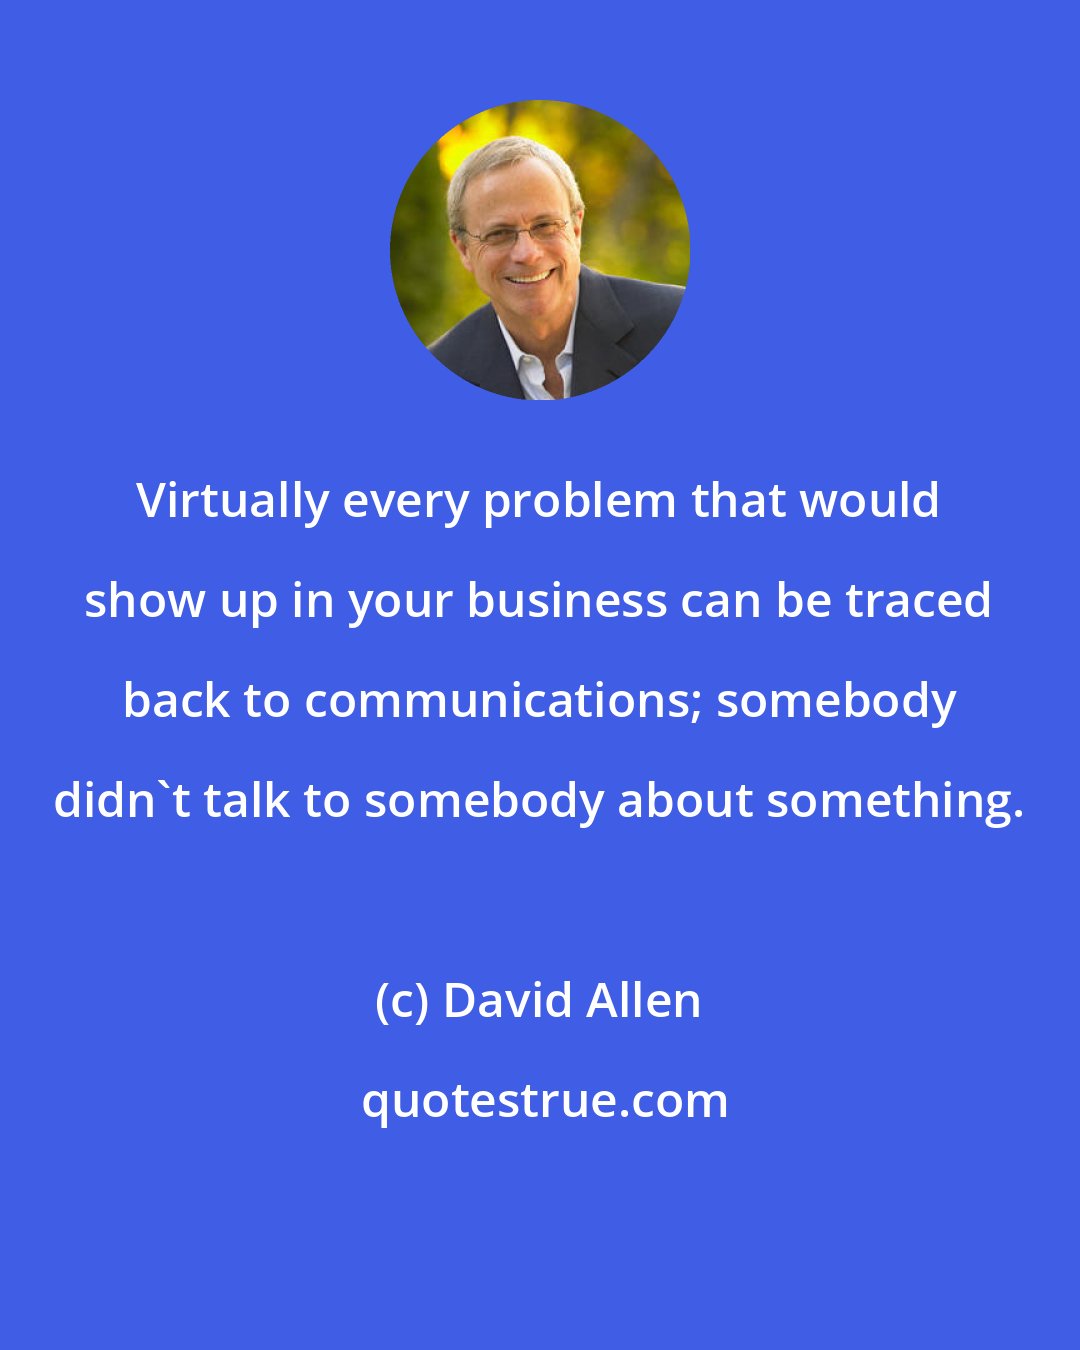 David Allen: Virtually every problem that would show up in your business can be traced back to communications; somebody didn't talk to somebody about something.